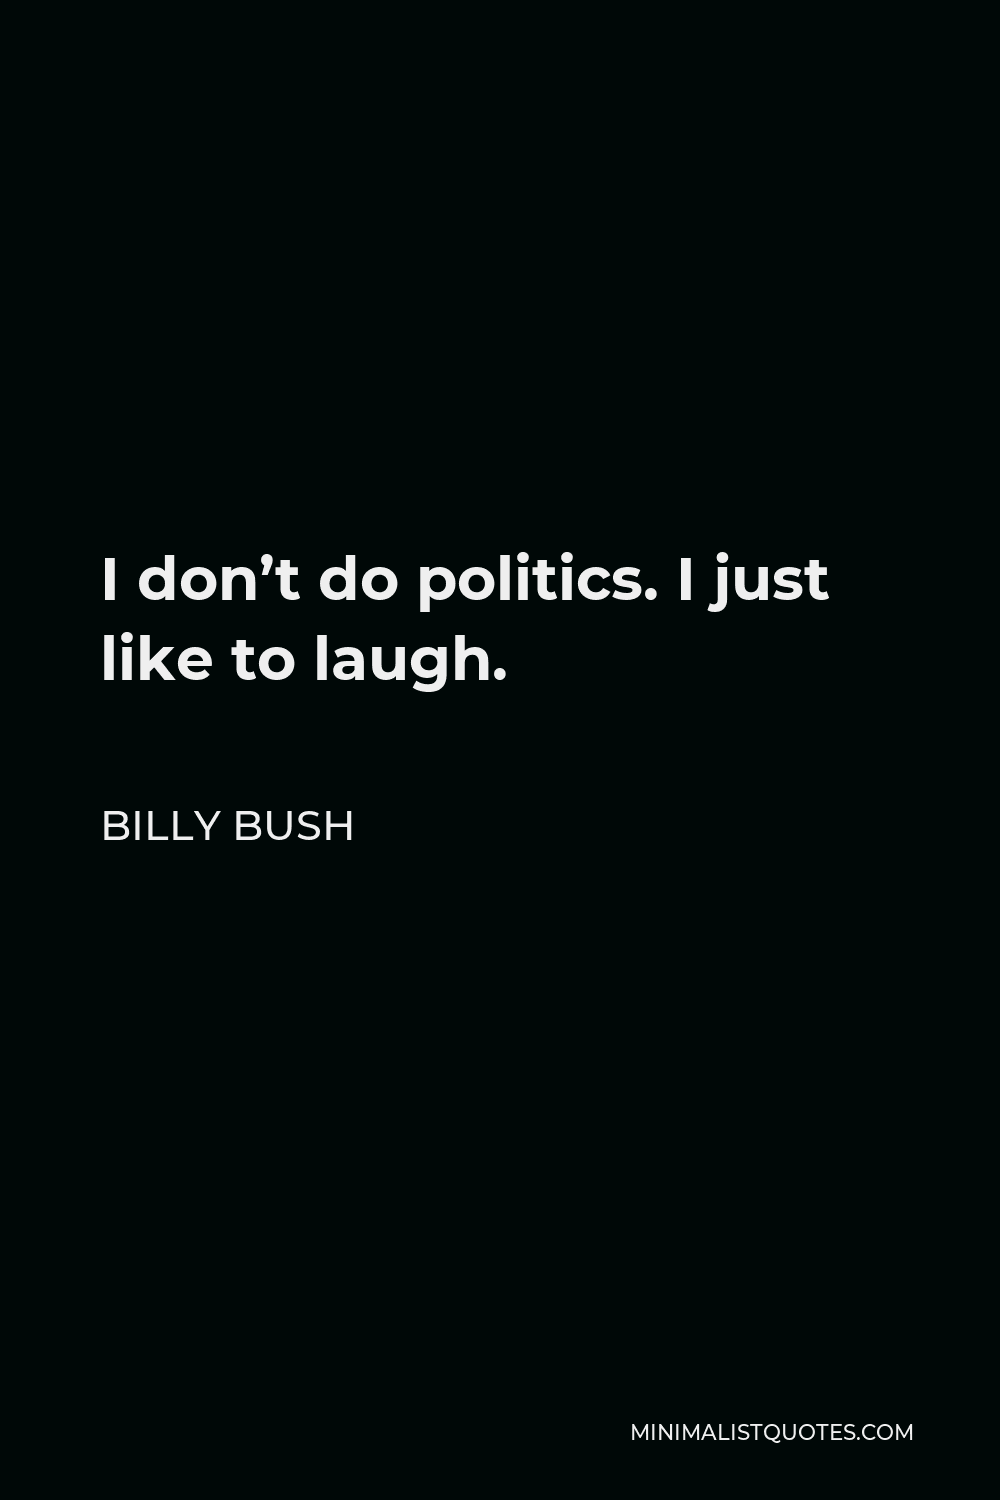 Billy Bush Quote - I don’t do politics. I just like to laugh.